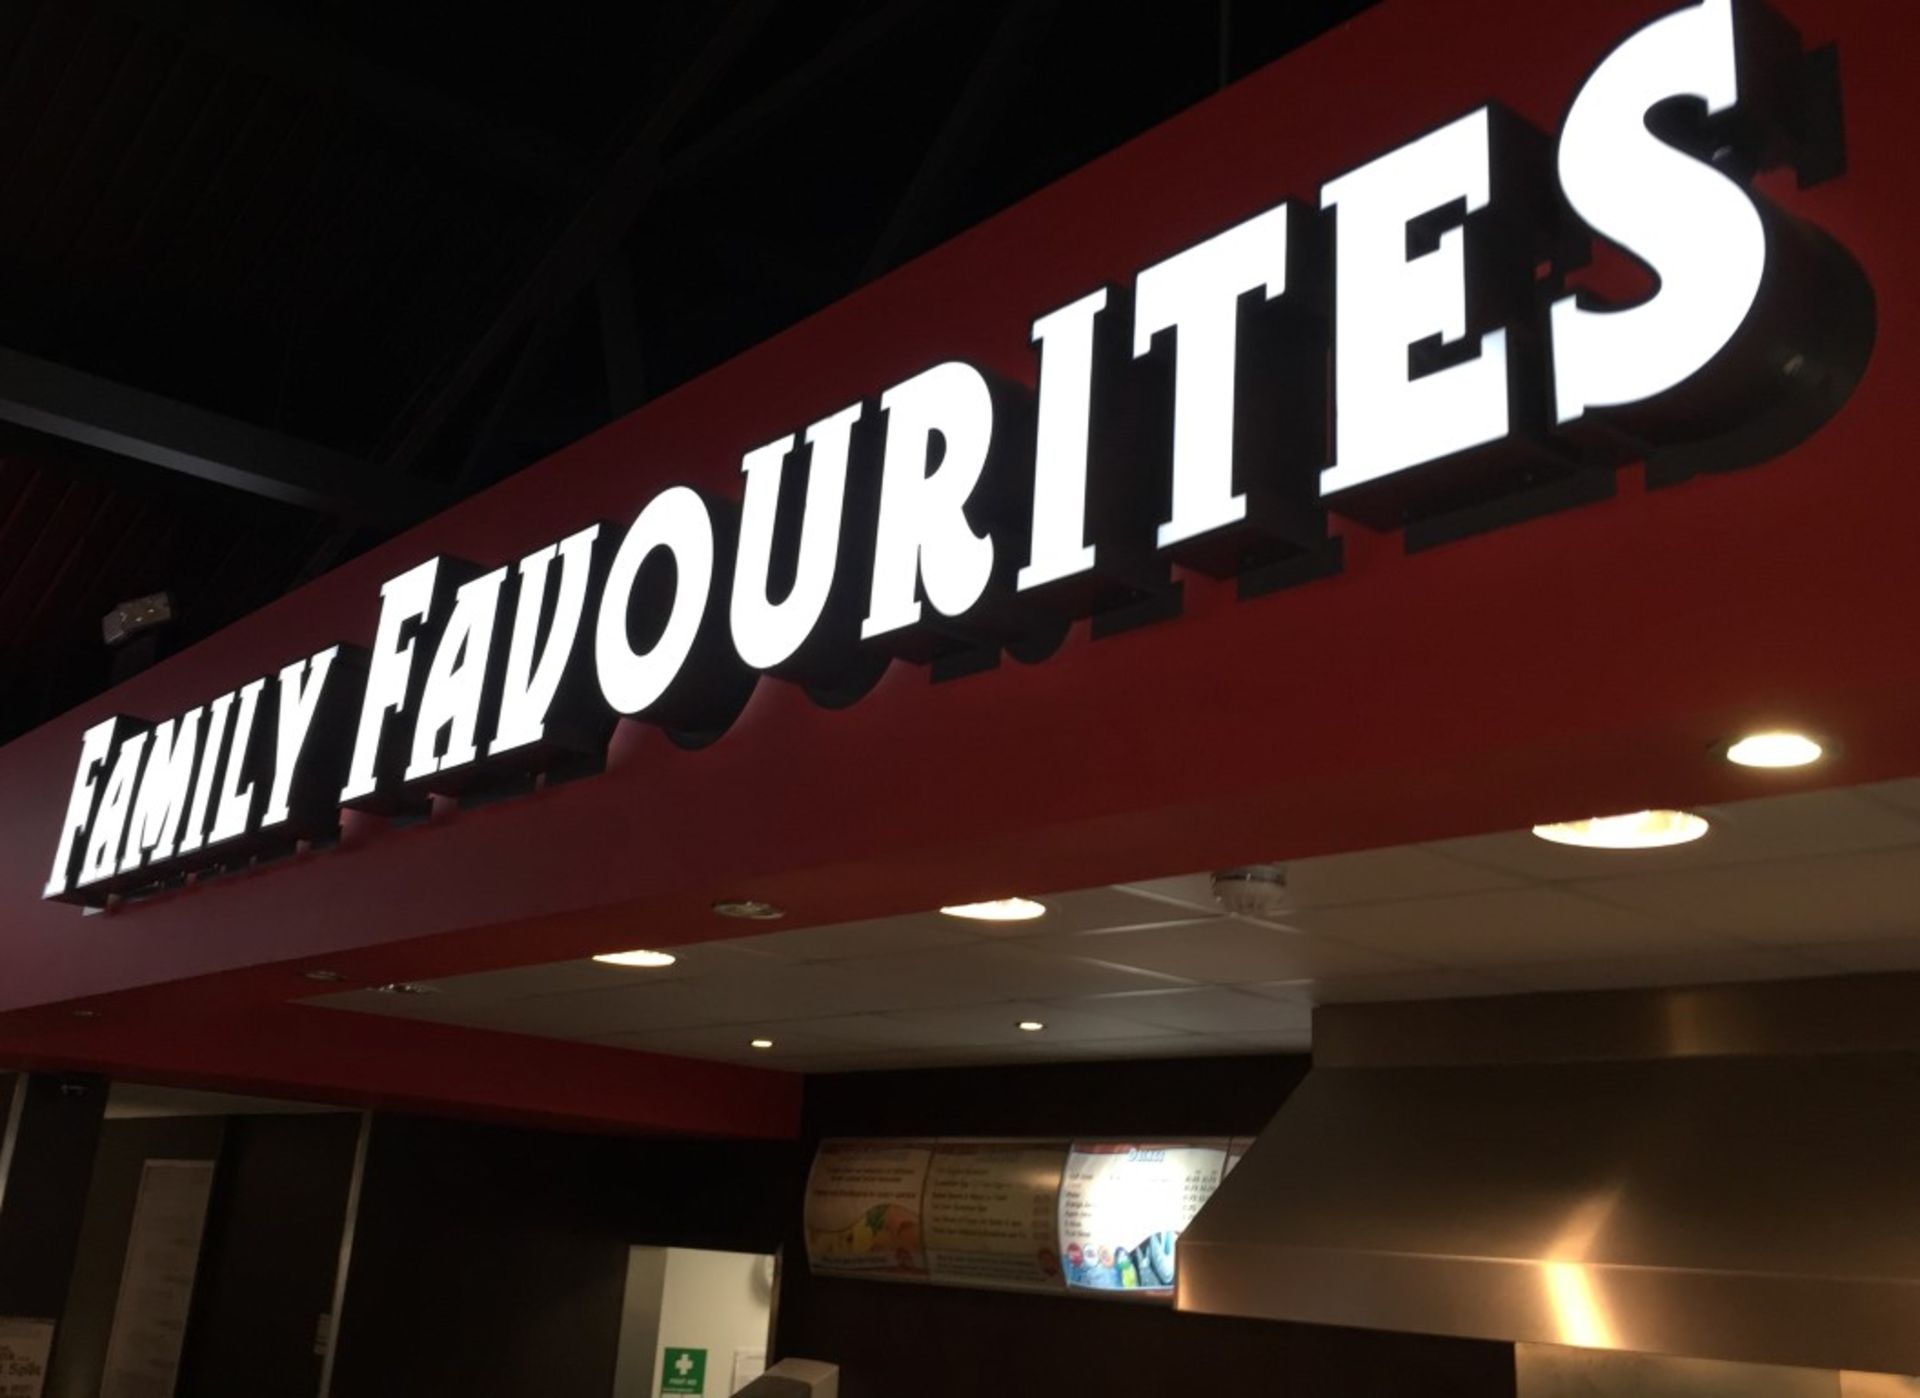 FAMILY FAVOURITES Illuminated SIGNAGE Individual Letters Measuring 9ft in Width - Approx Letter